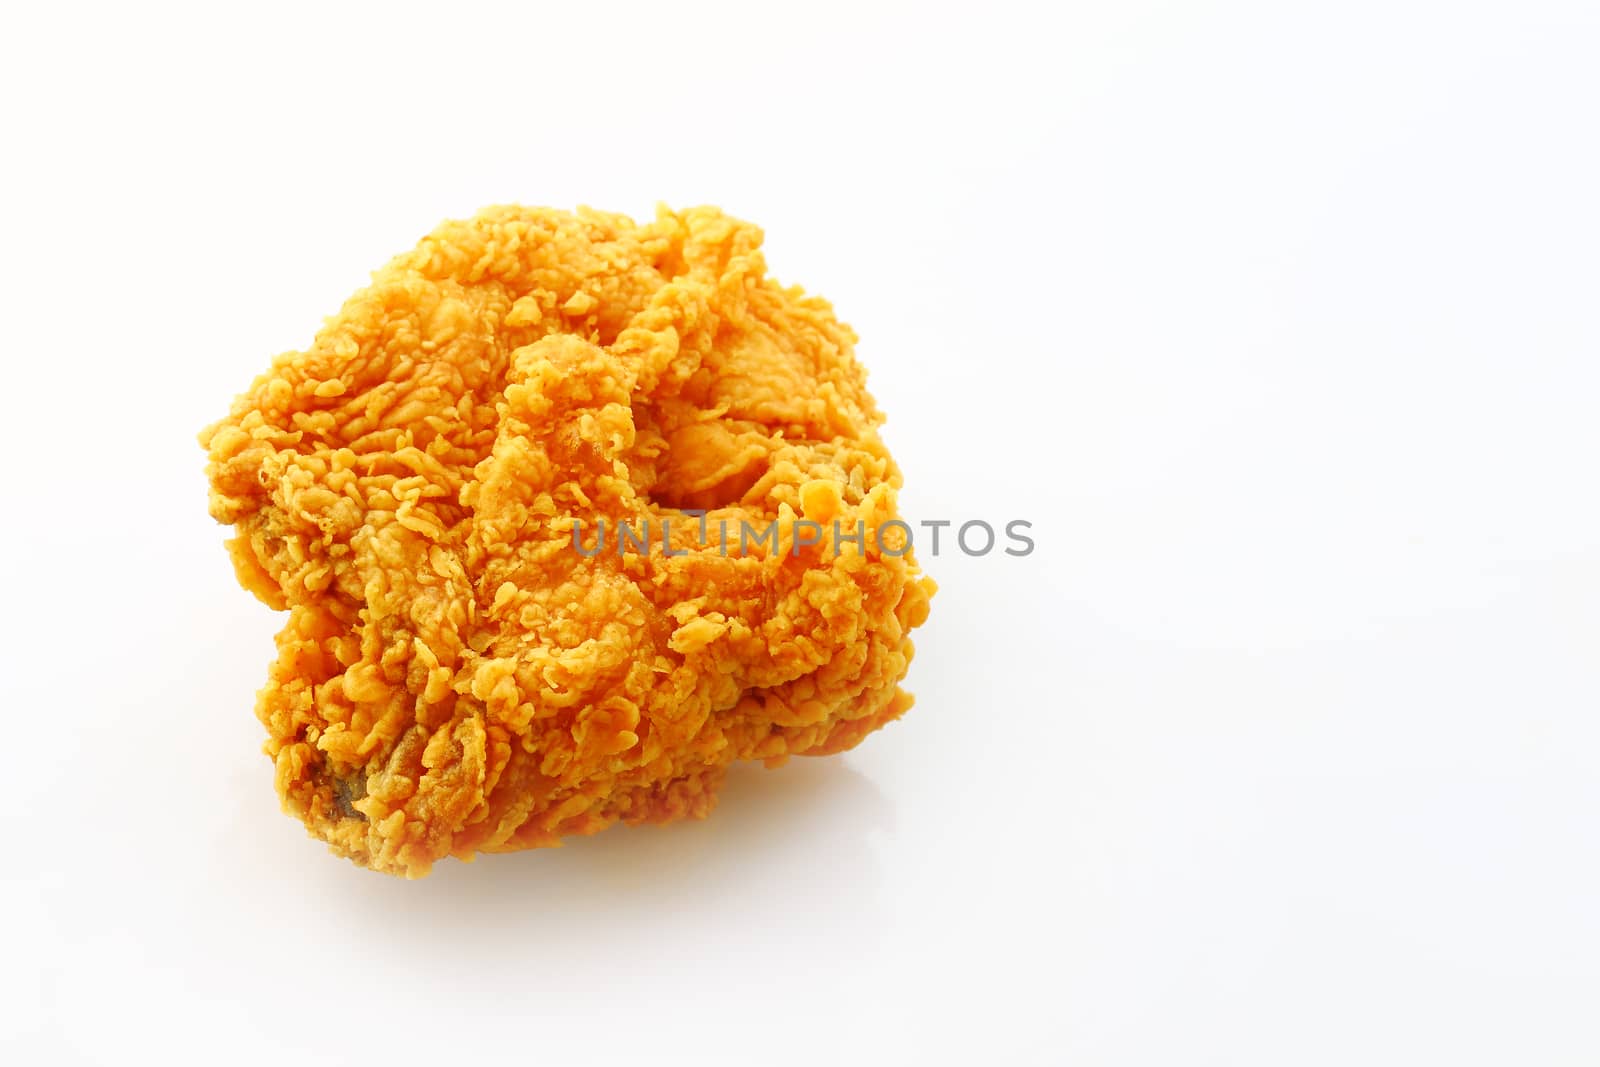 Fried chicken breast isolated on a white background.